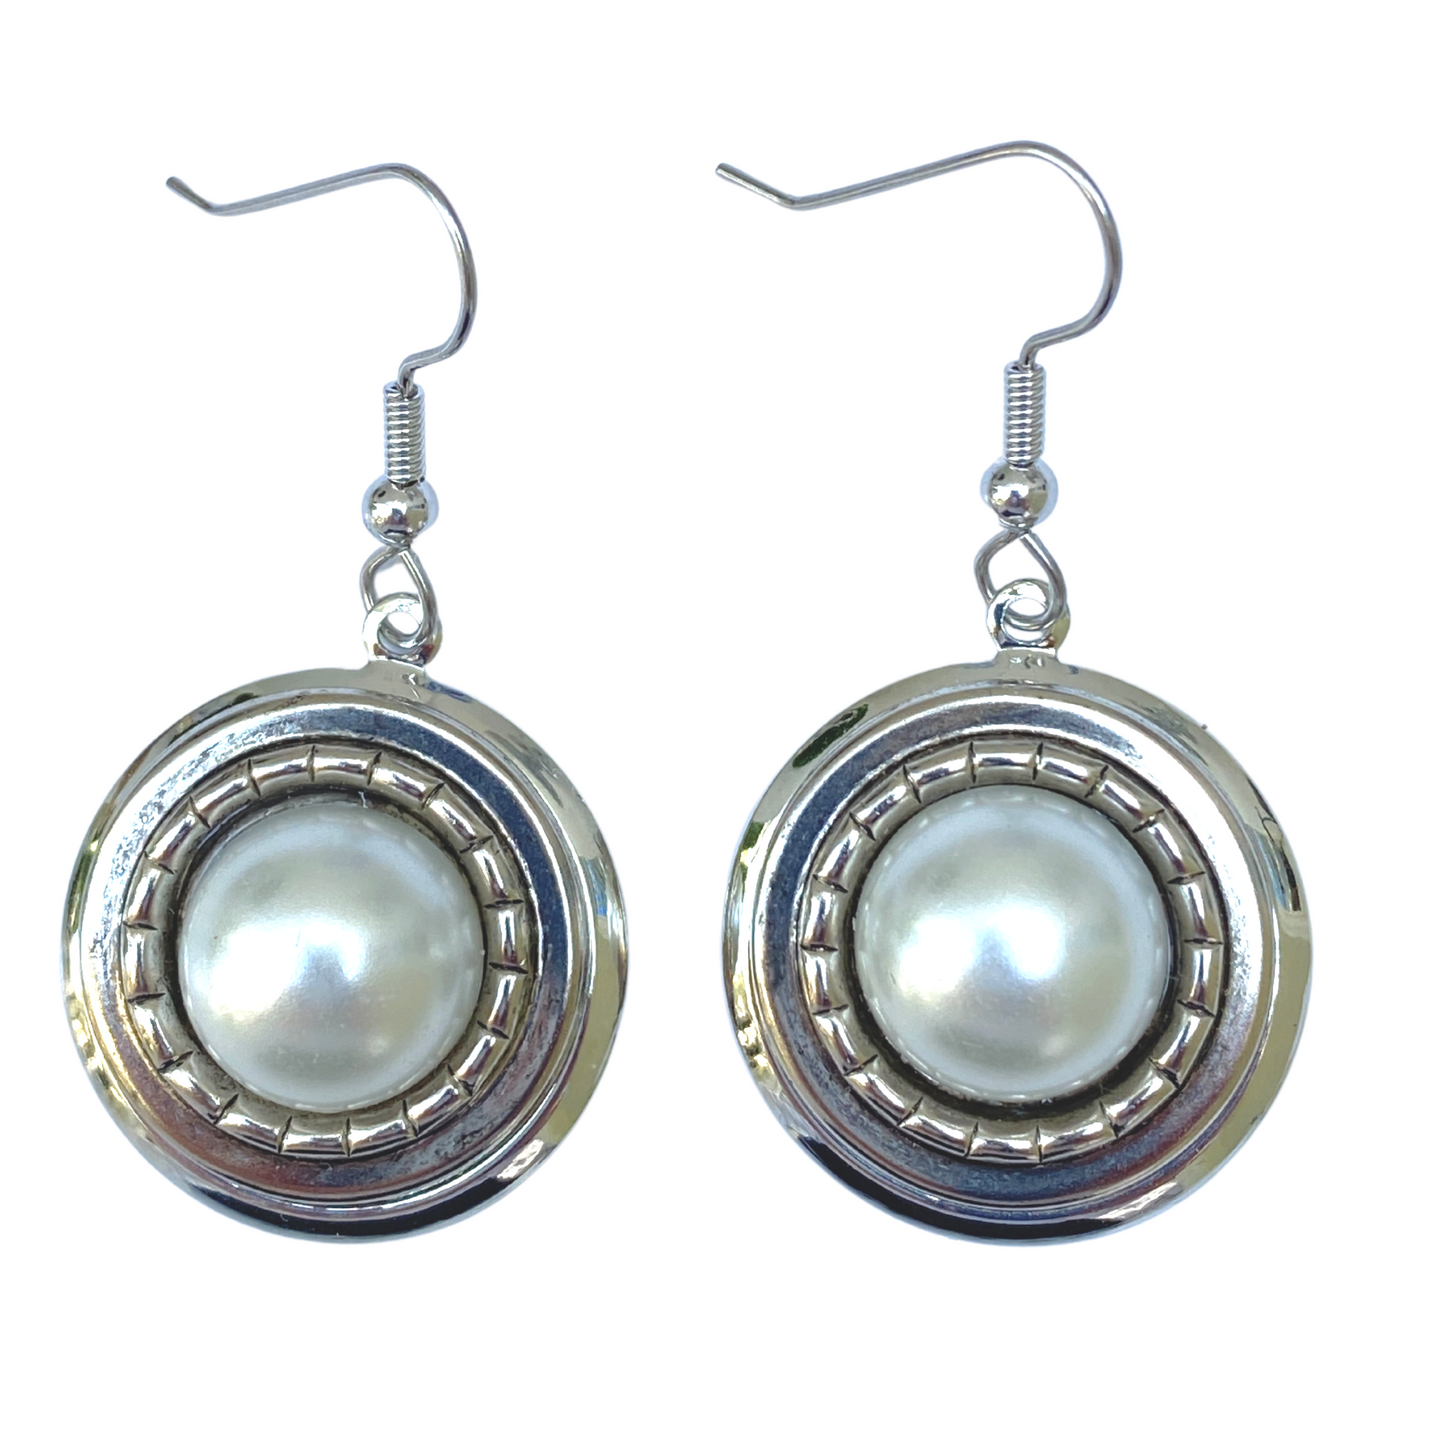 Earring Silver Round | Faux Pearl Setting | Art Nouveau Style